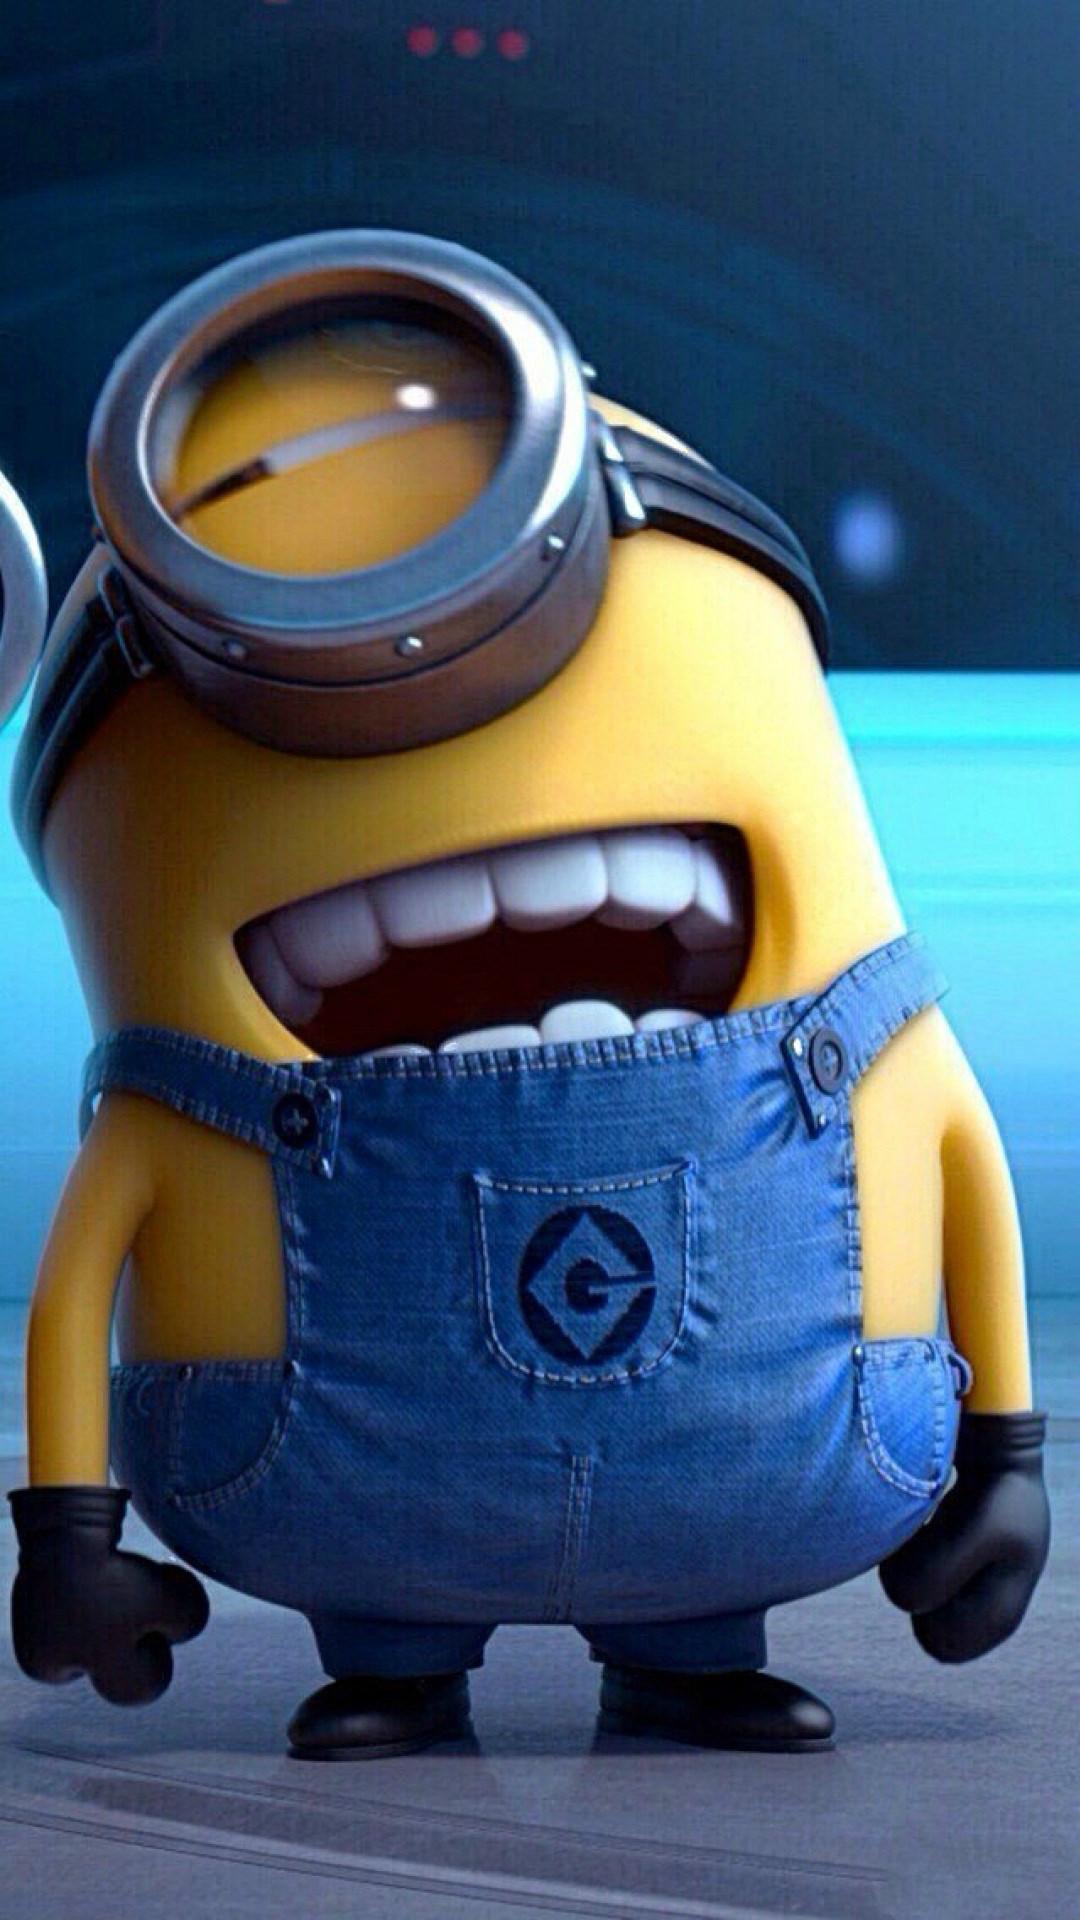 10 Minion Wallpaper Ideas  You think Im crazy now  Idea Wallpapers  iPhone  WallpapersColor Schemes